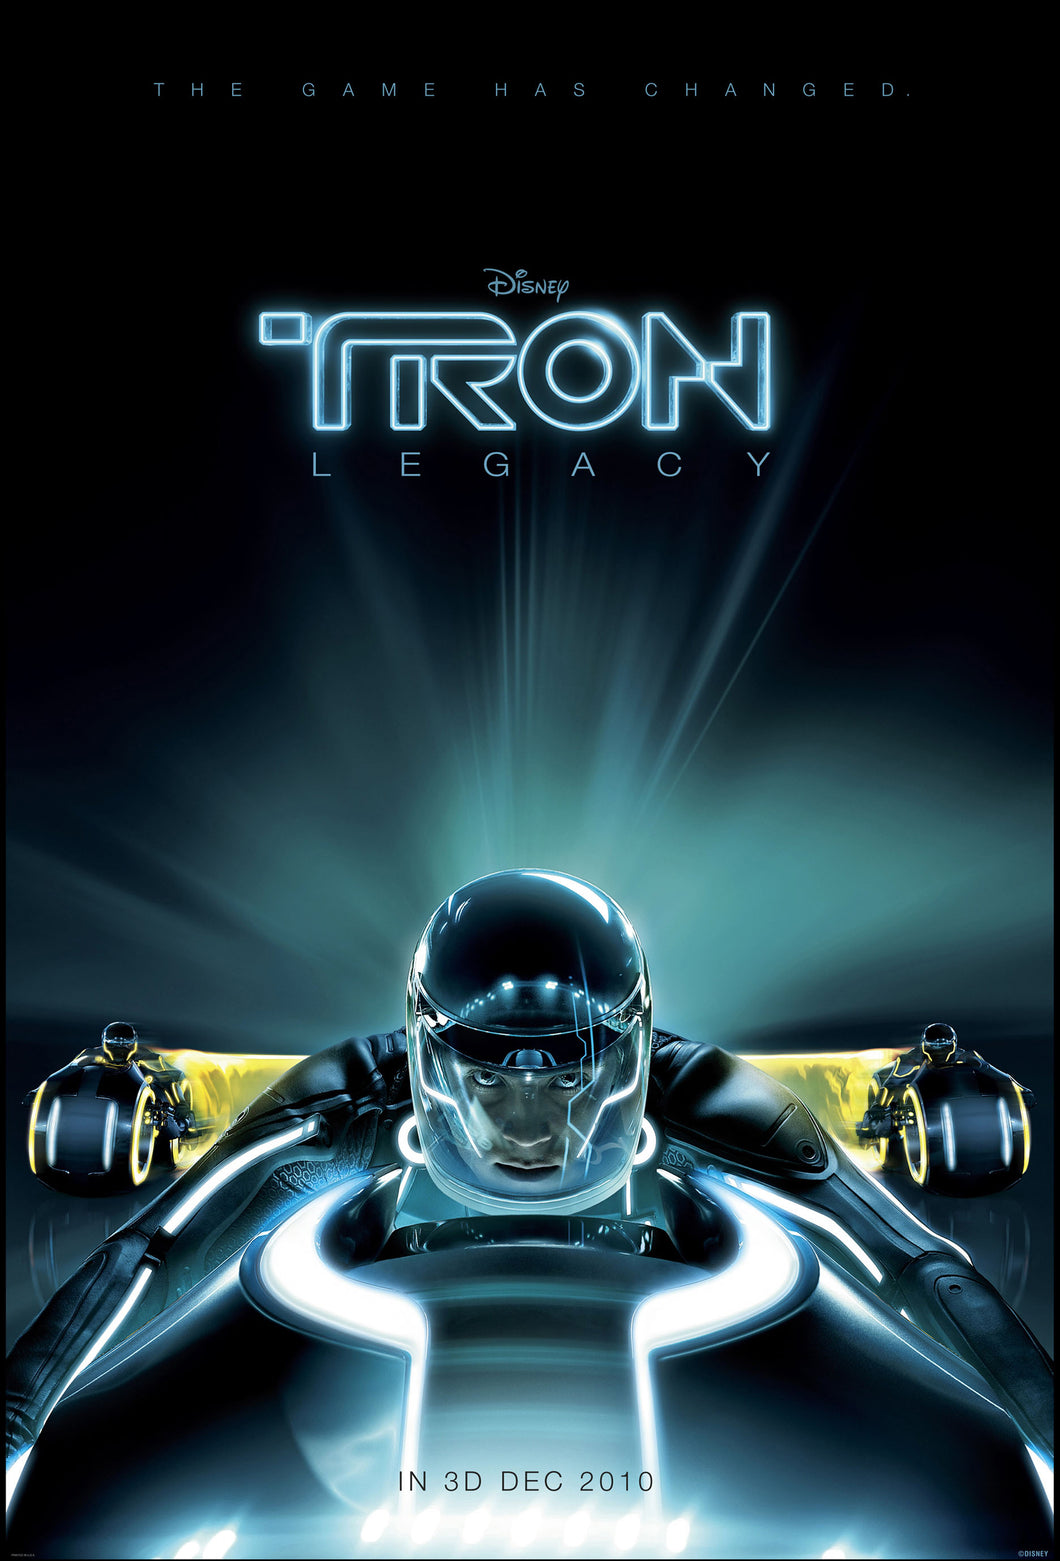 Tron Movie Poster Framed or Unframed Glossy Poster Free UK Shipping!!!